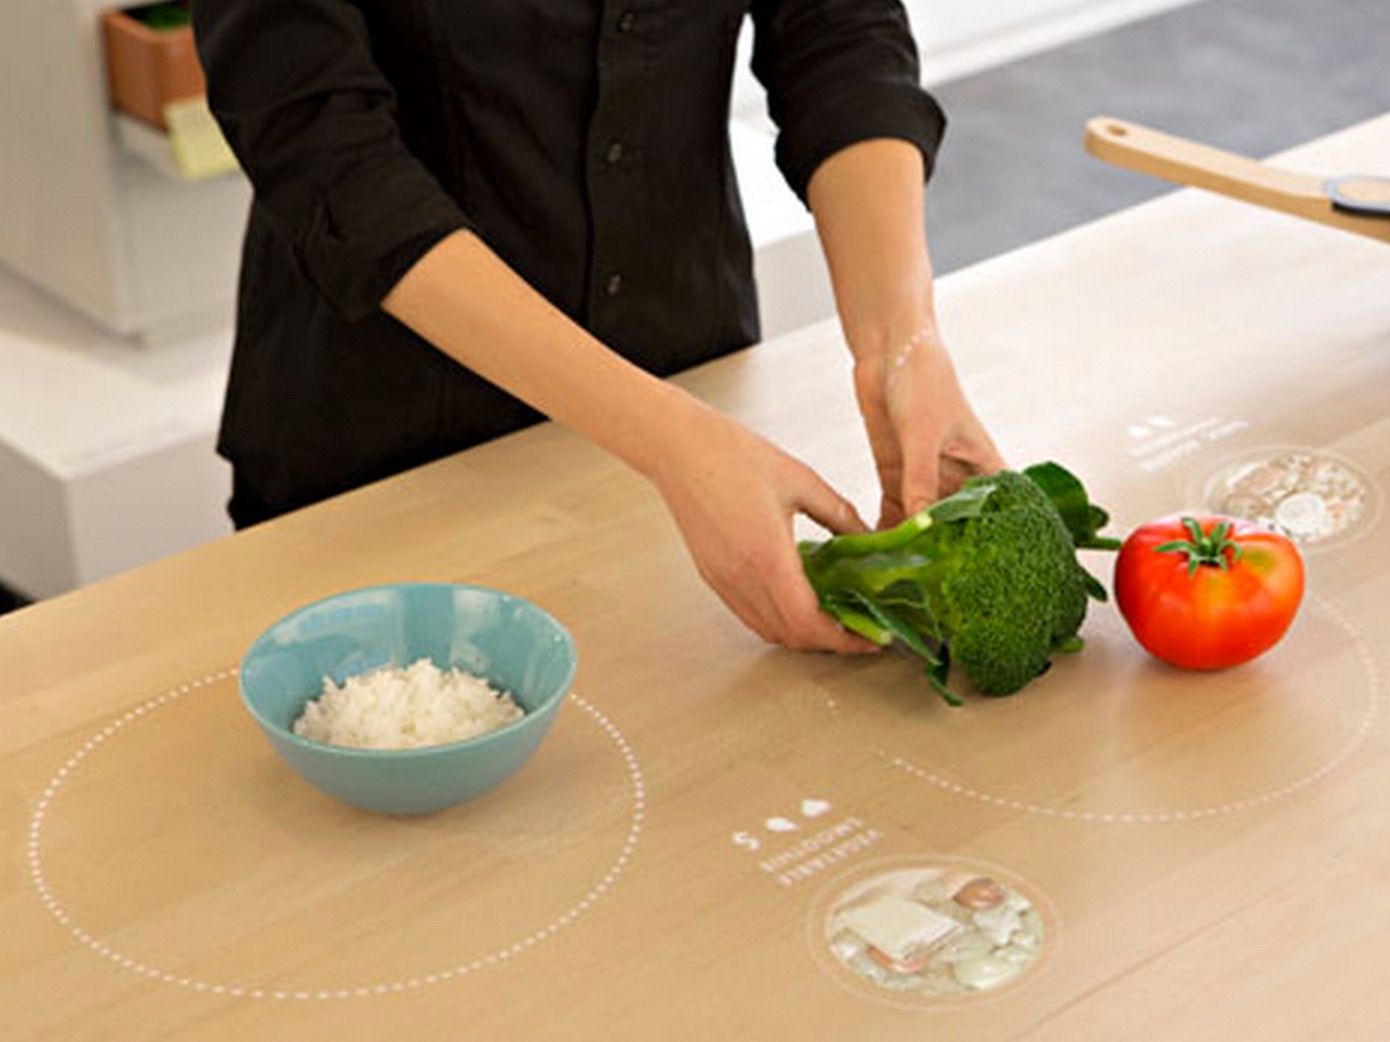 ikea thinks in 2025 we ll be cooking on tables that project recipes and more image 1